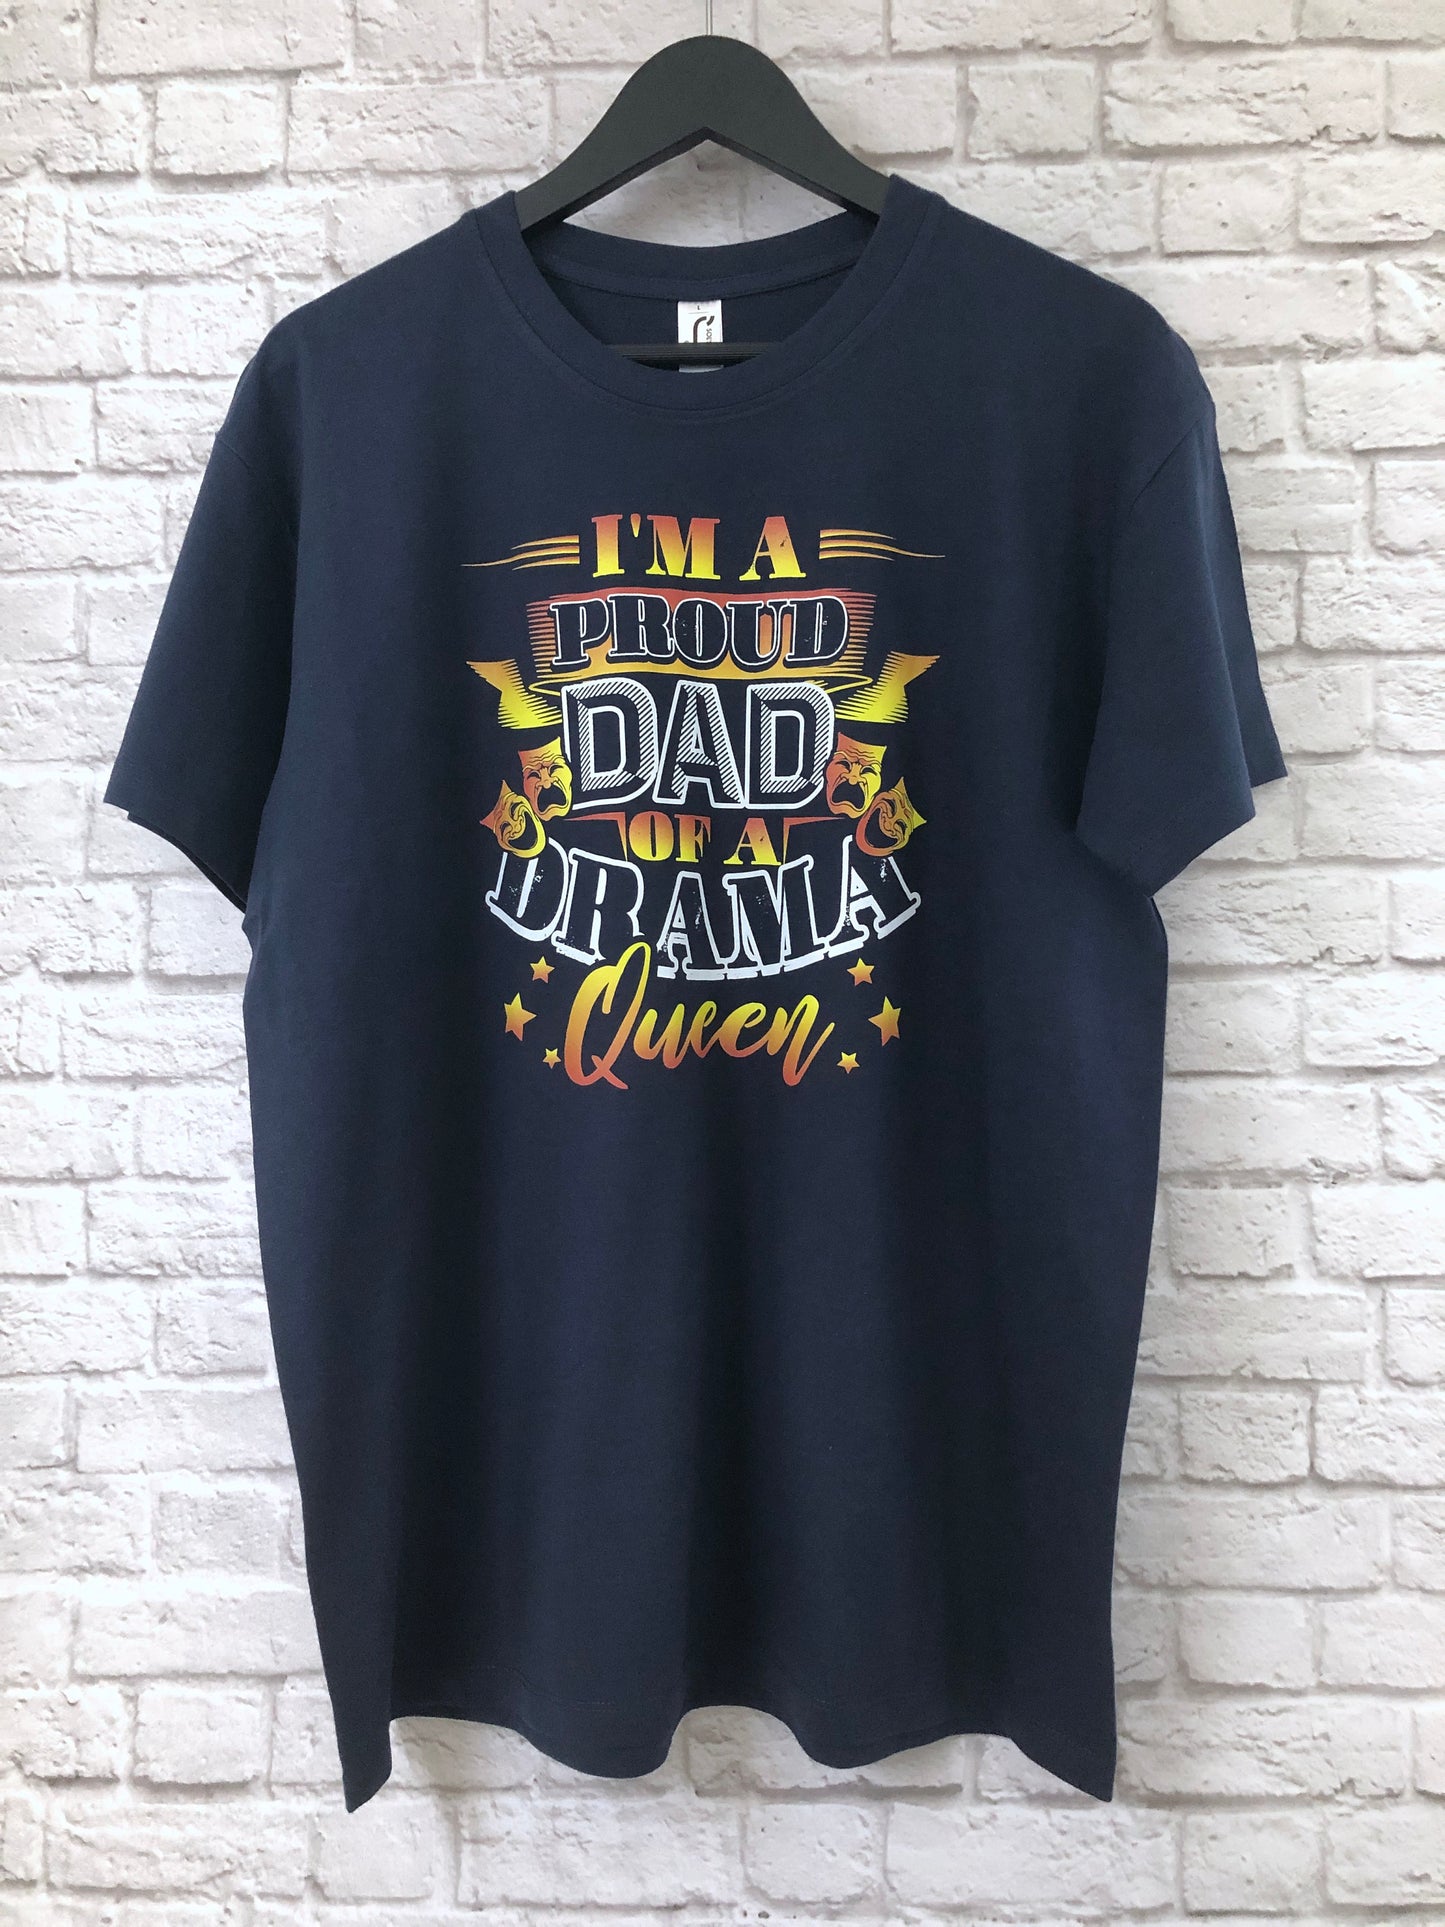 Proud Dad T-Shirt, Funny Drama Queen Gift Idea, Humorous Father Daughter Graphic Print Design Printed on Tee Shirt Top